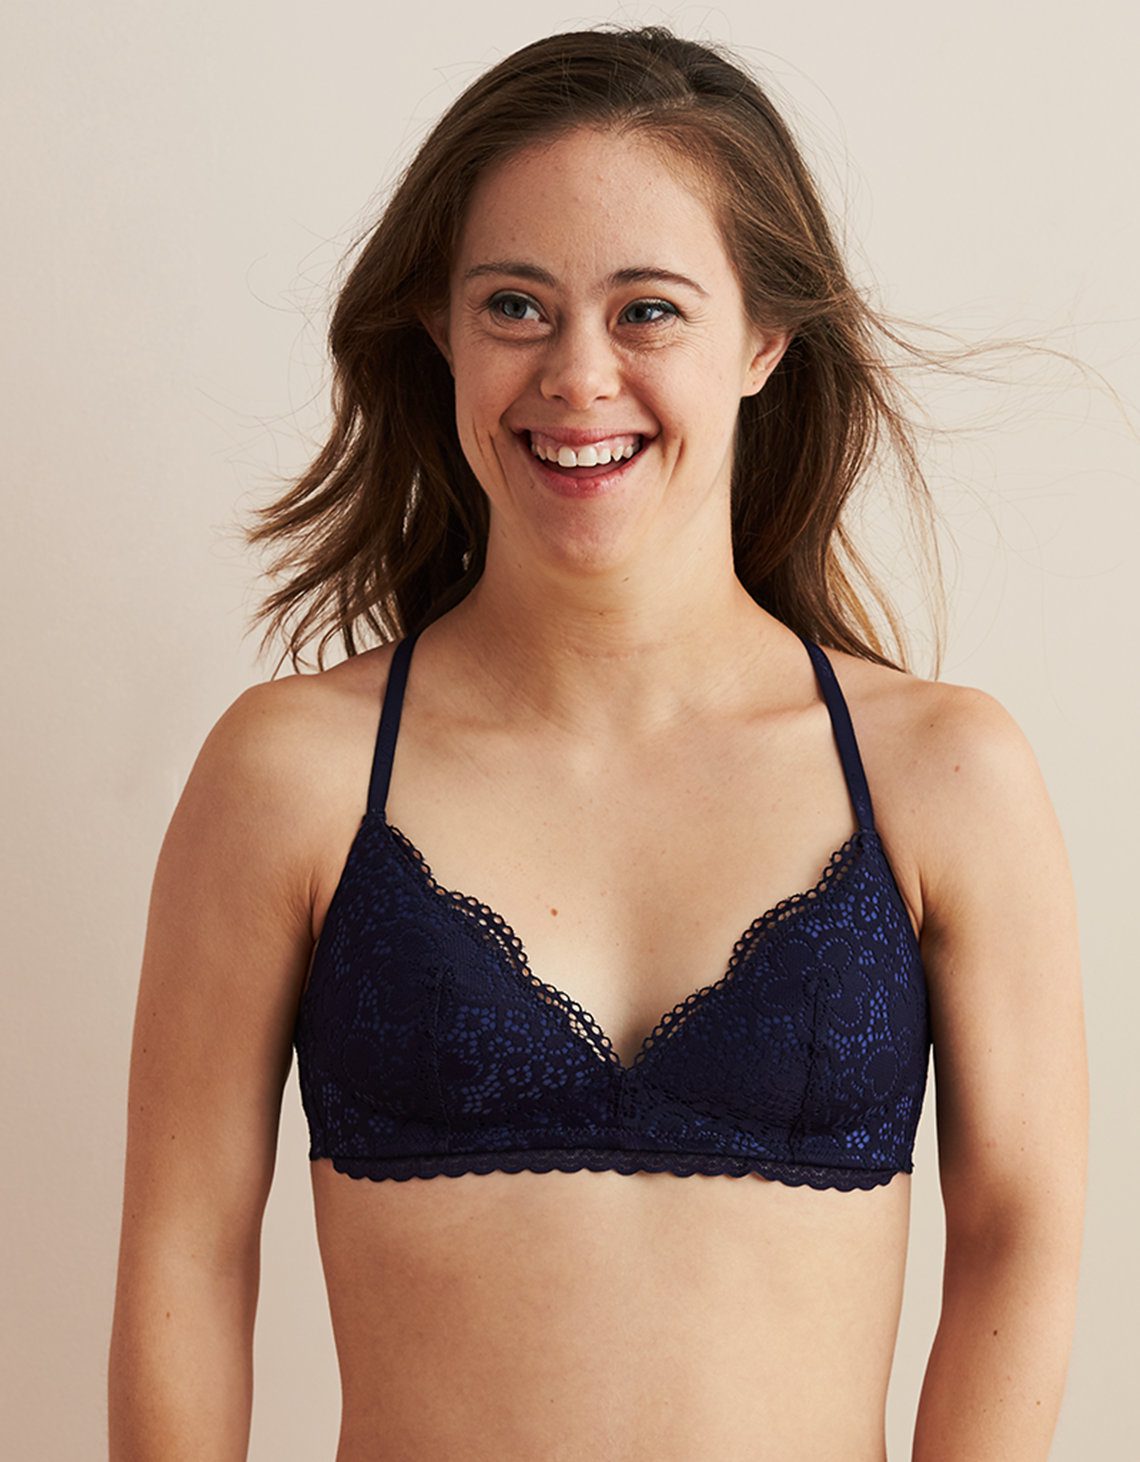 Aerie's Latest Campaign Features Real Women